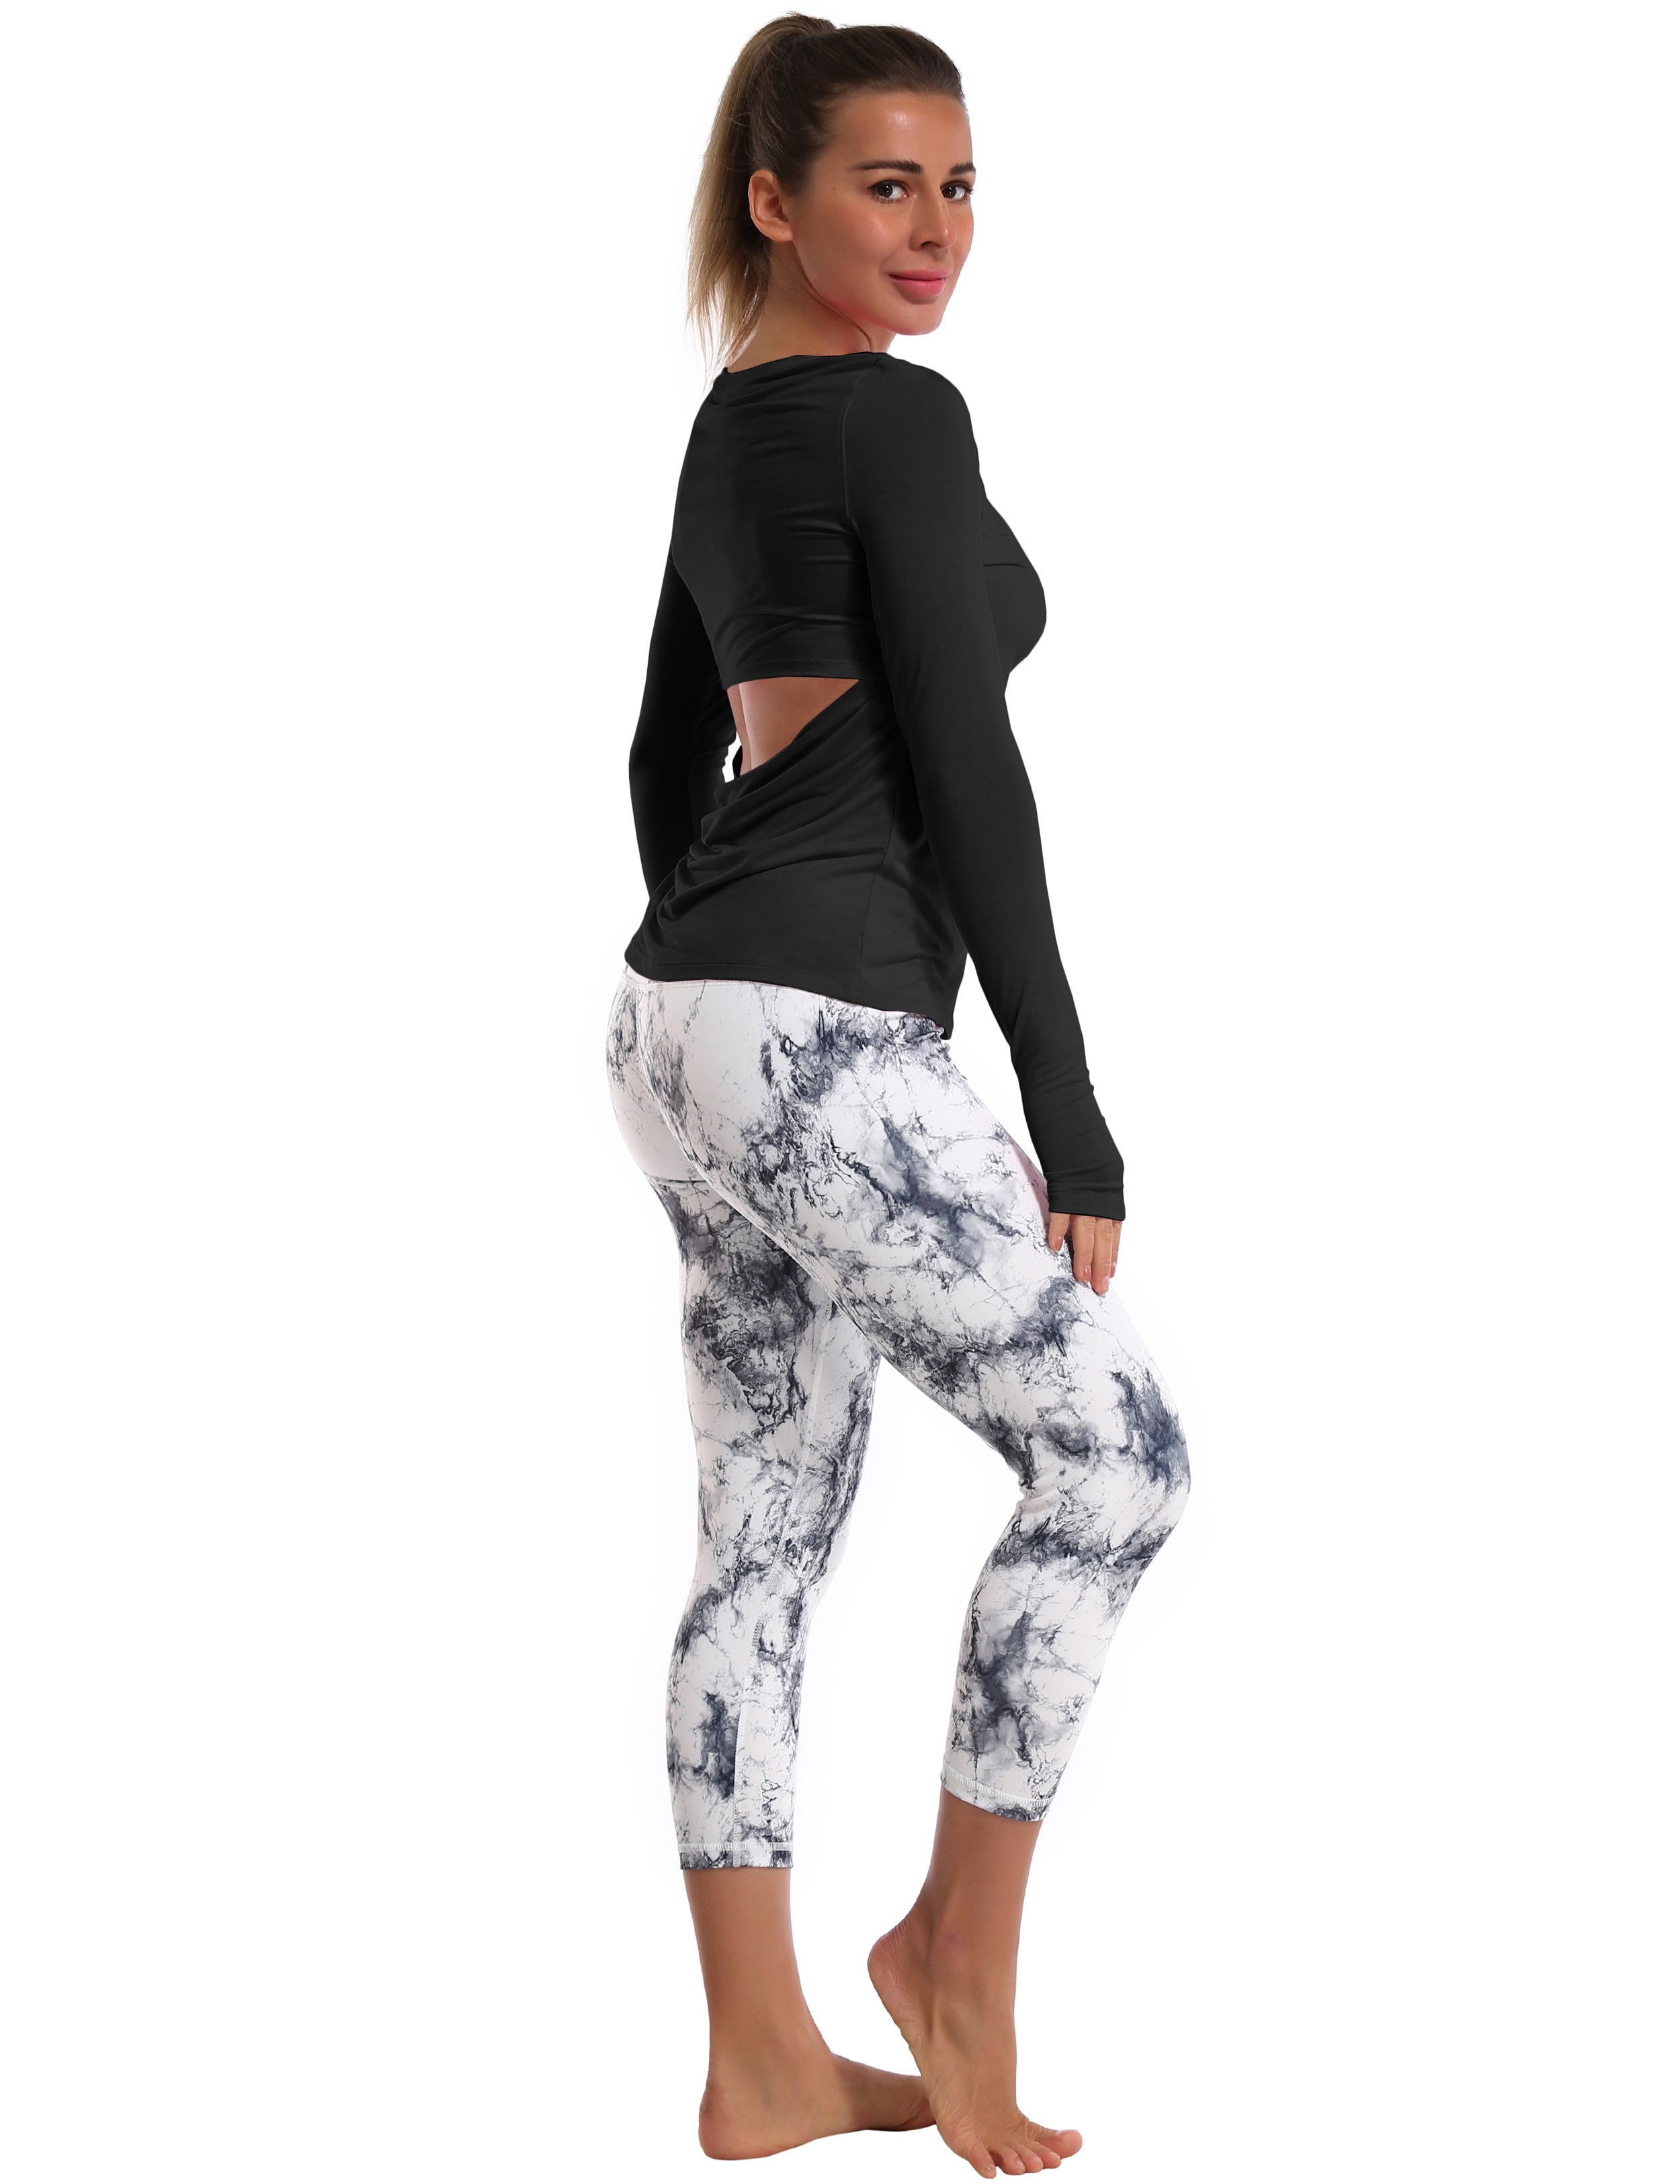 Open Back Long Sleeve Tops black Designed for On the Move Slim fit 93%Modal/7%Spandex Four-way stretch Naturally breathable Super-Soft, Modal Fabric